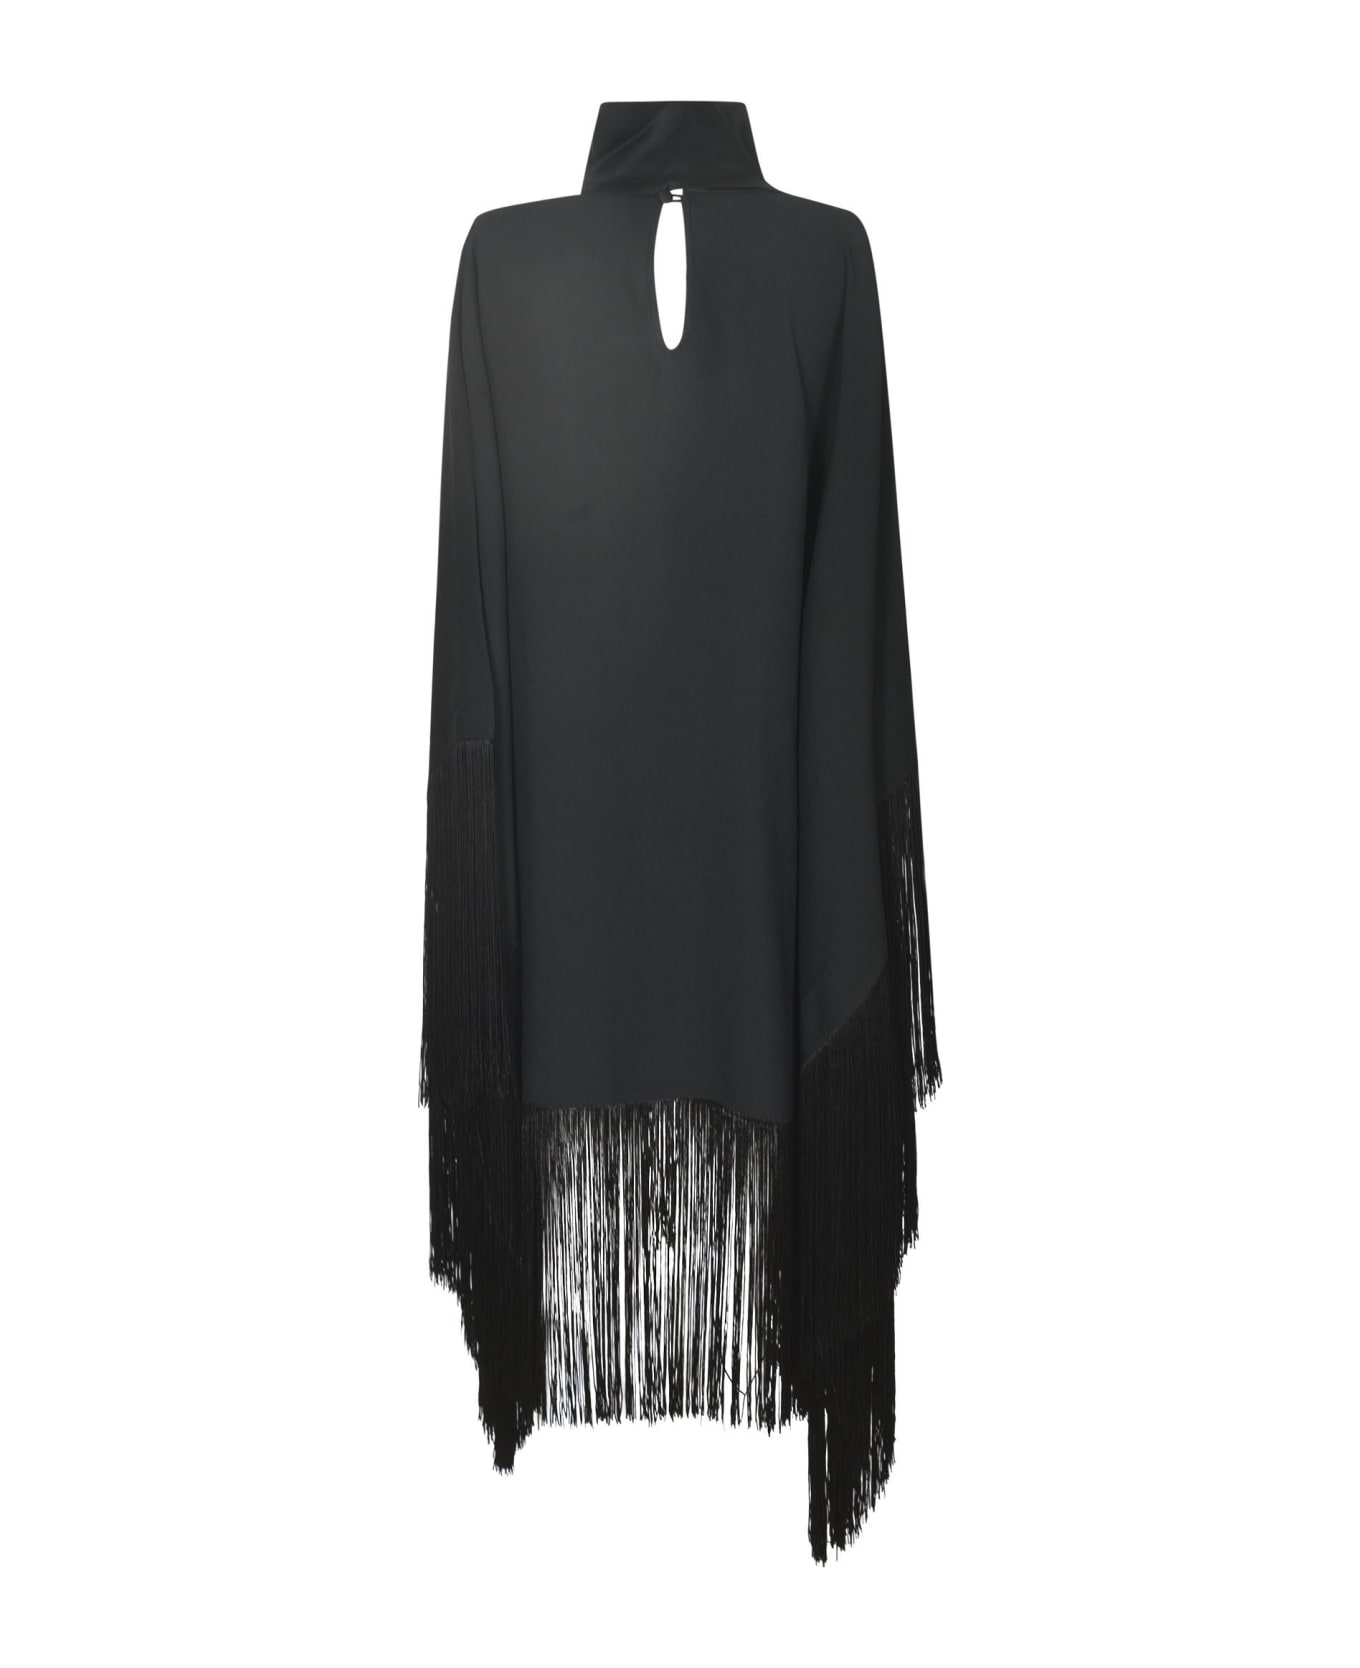 Taller Marmo Fringed Cape - Black